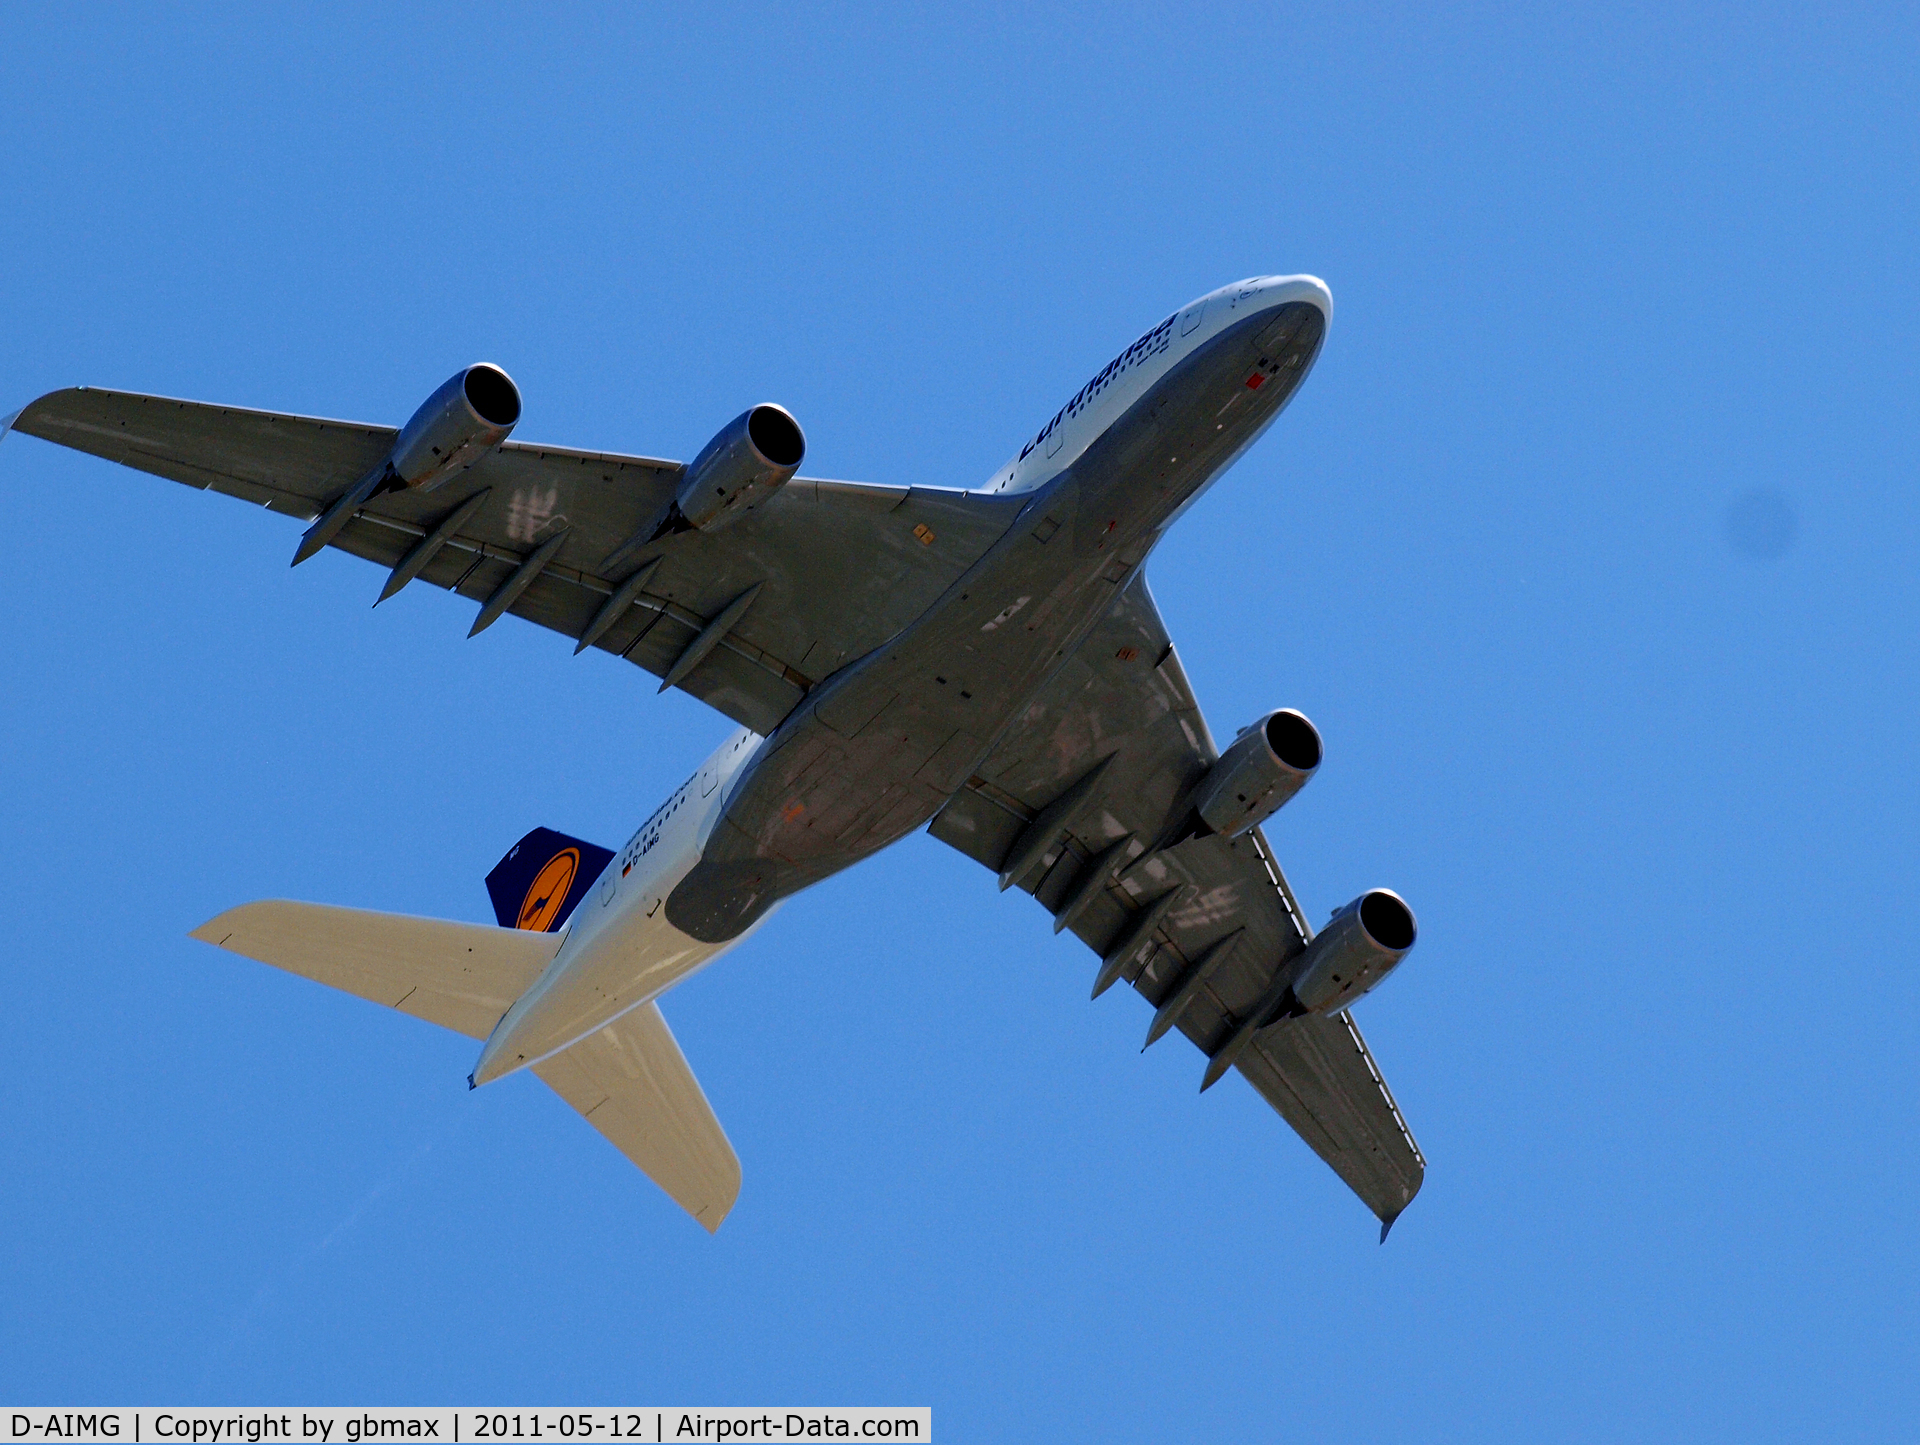 D-AIMG, 2011 Airbus A380-841 C/N 069, Flying over Mineola, NY, going to a landing at JFK